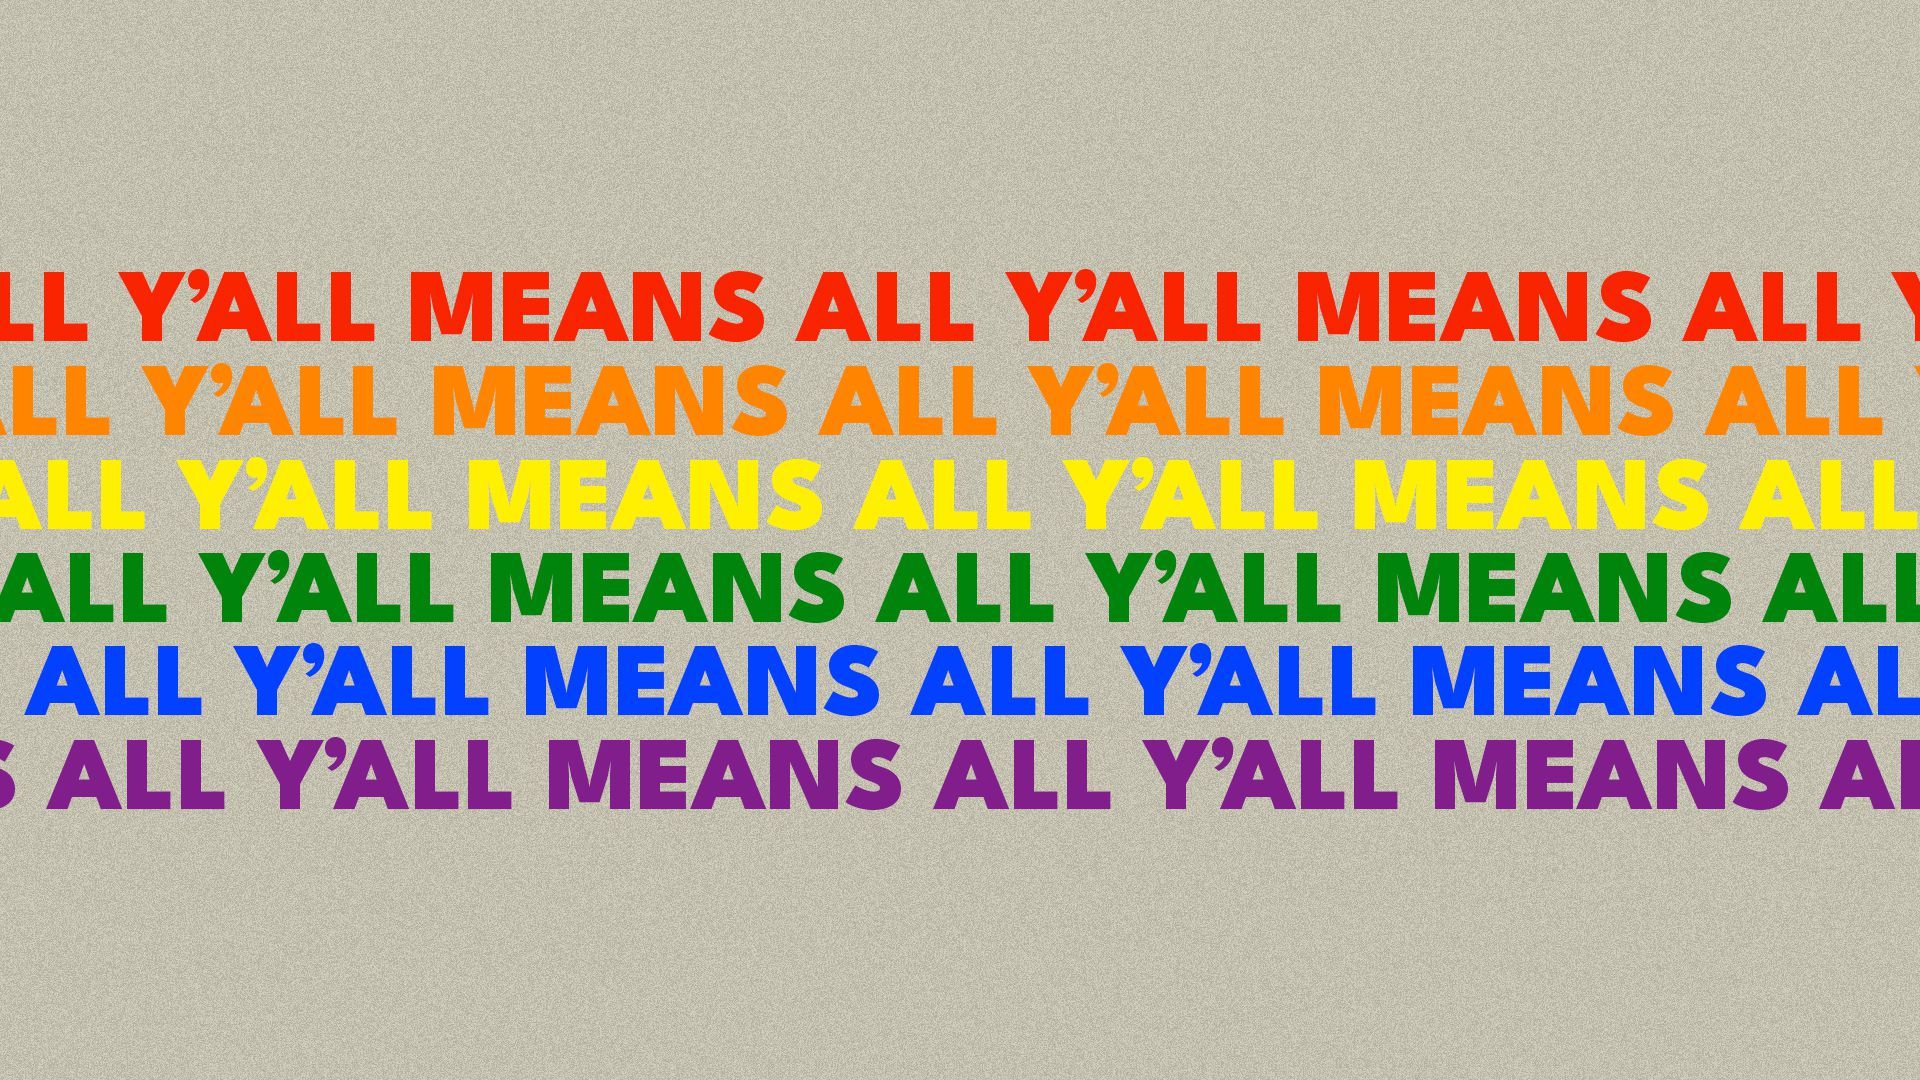 Illustration of the words "Y'all means all" repeated to form an LGBTQ Pride flag.